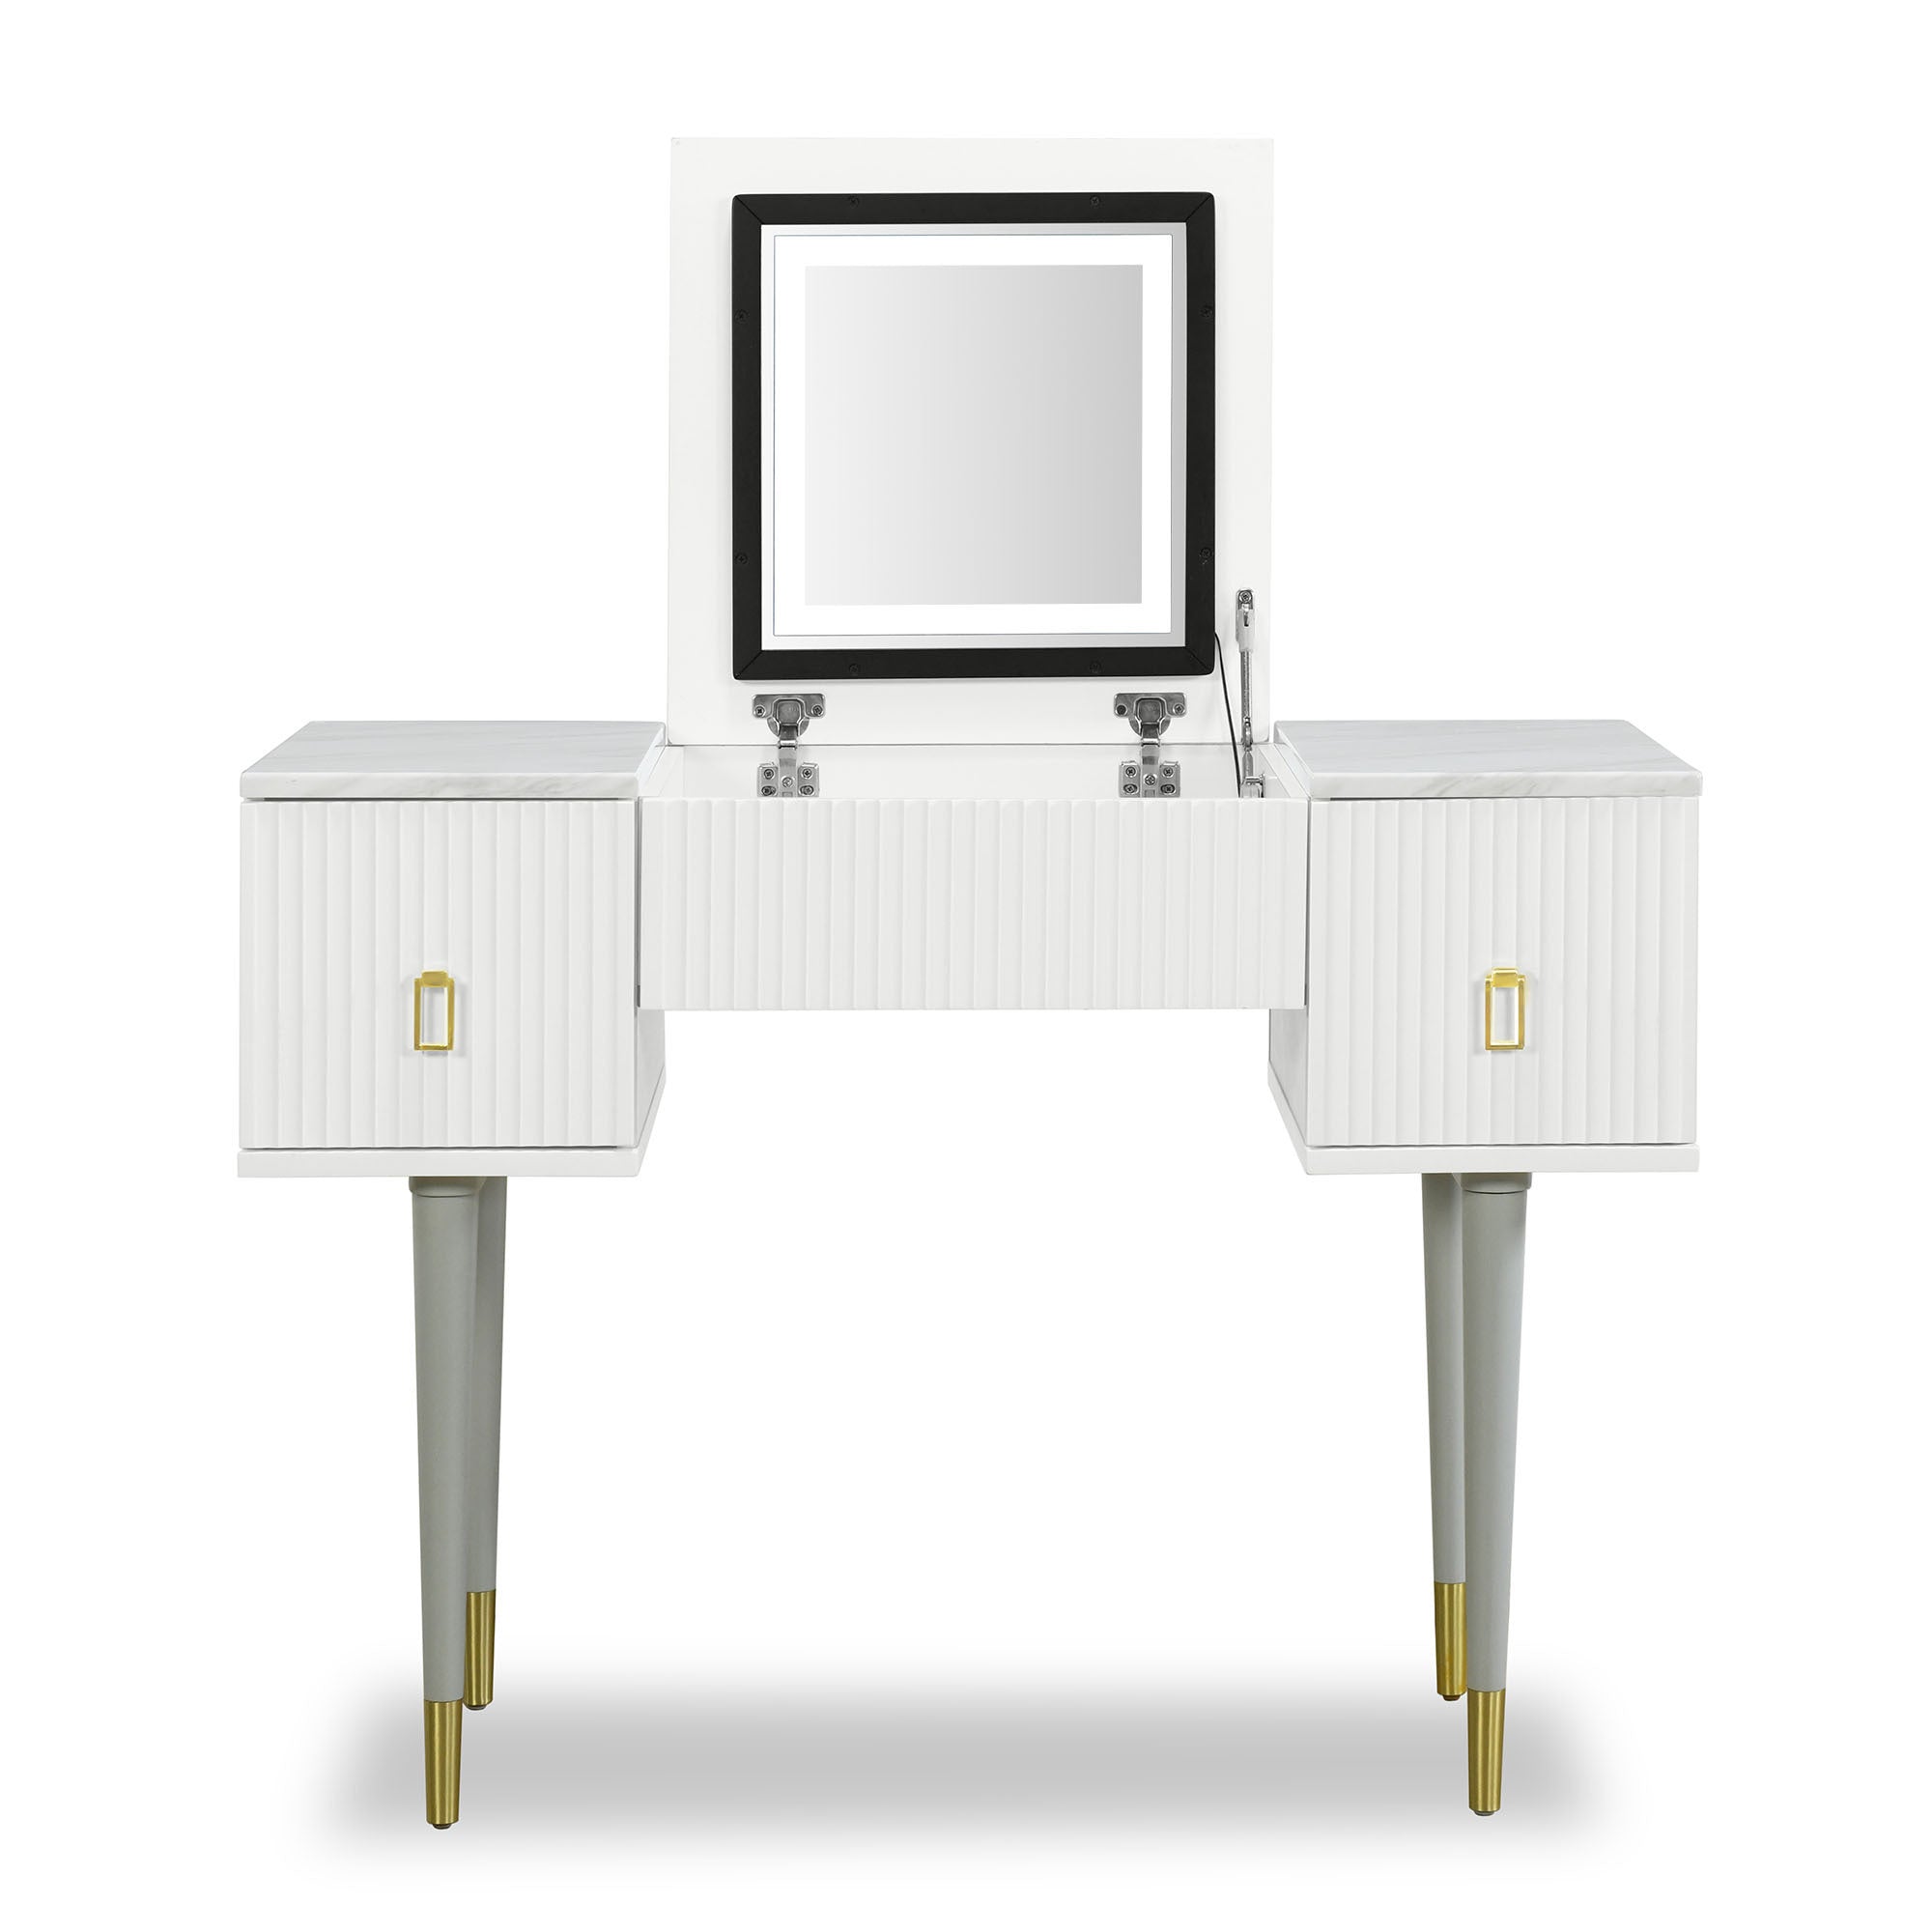 43.3" Modern Vanity Table Set with Flip-top Mirror and LED Light - White and Gray